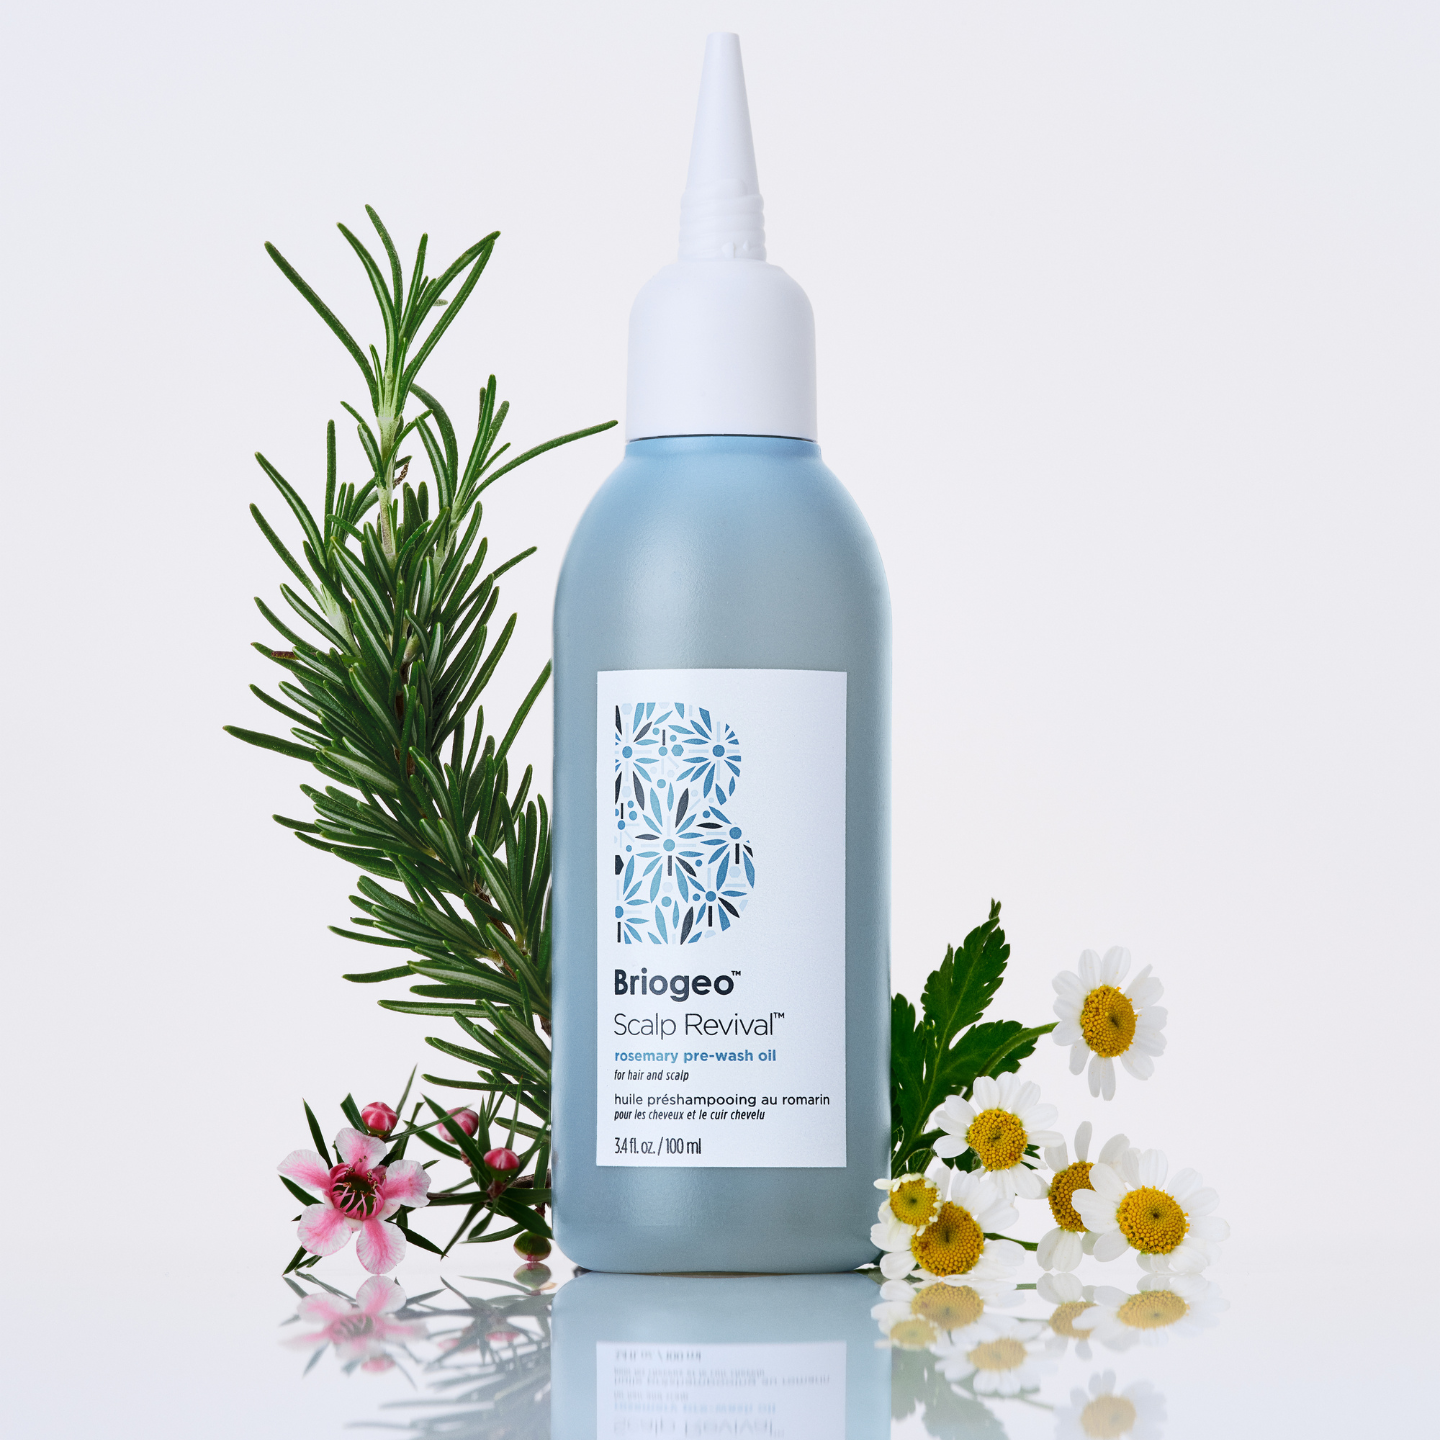 Hand dipping Scalp Revival micro-exfoliating shampoo in shower. 